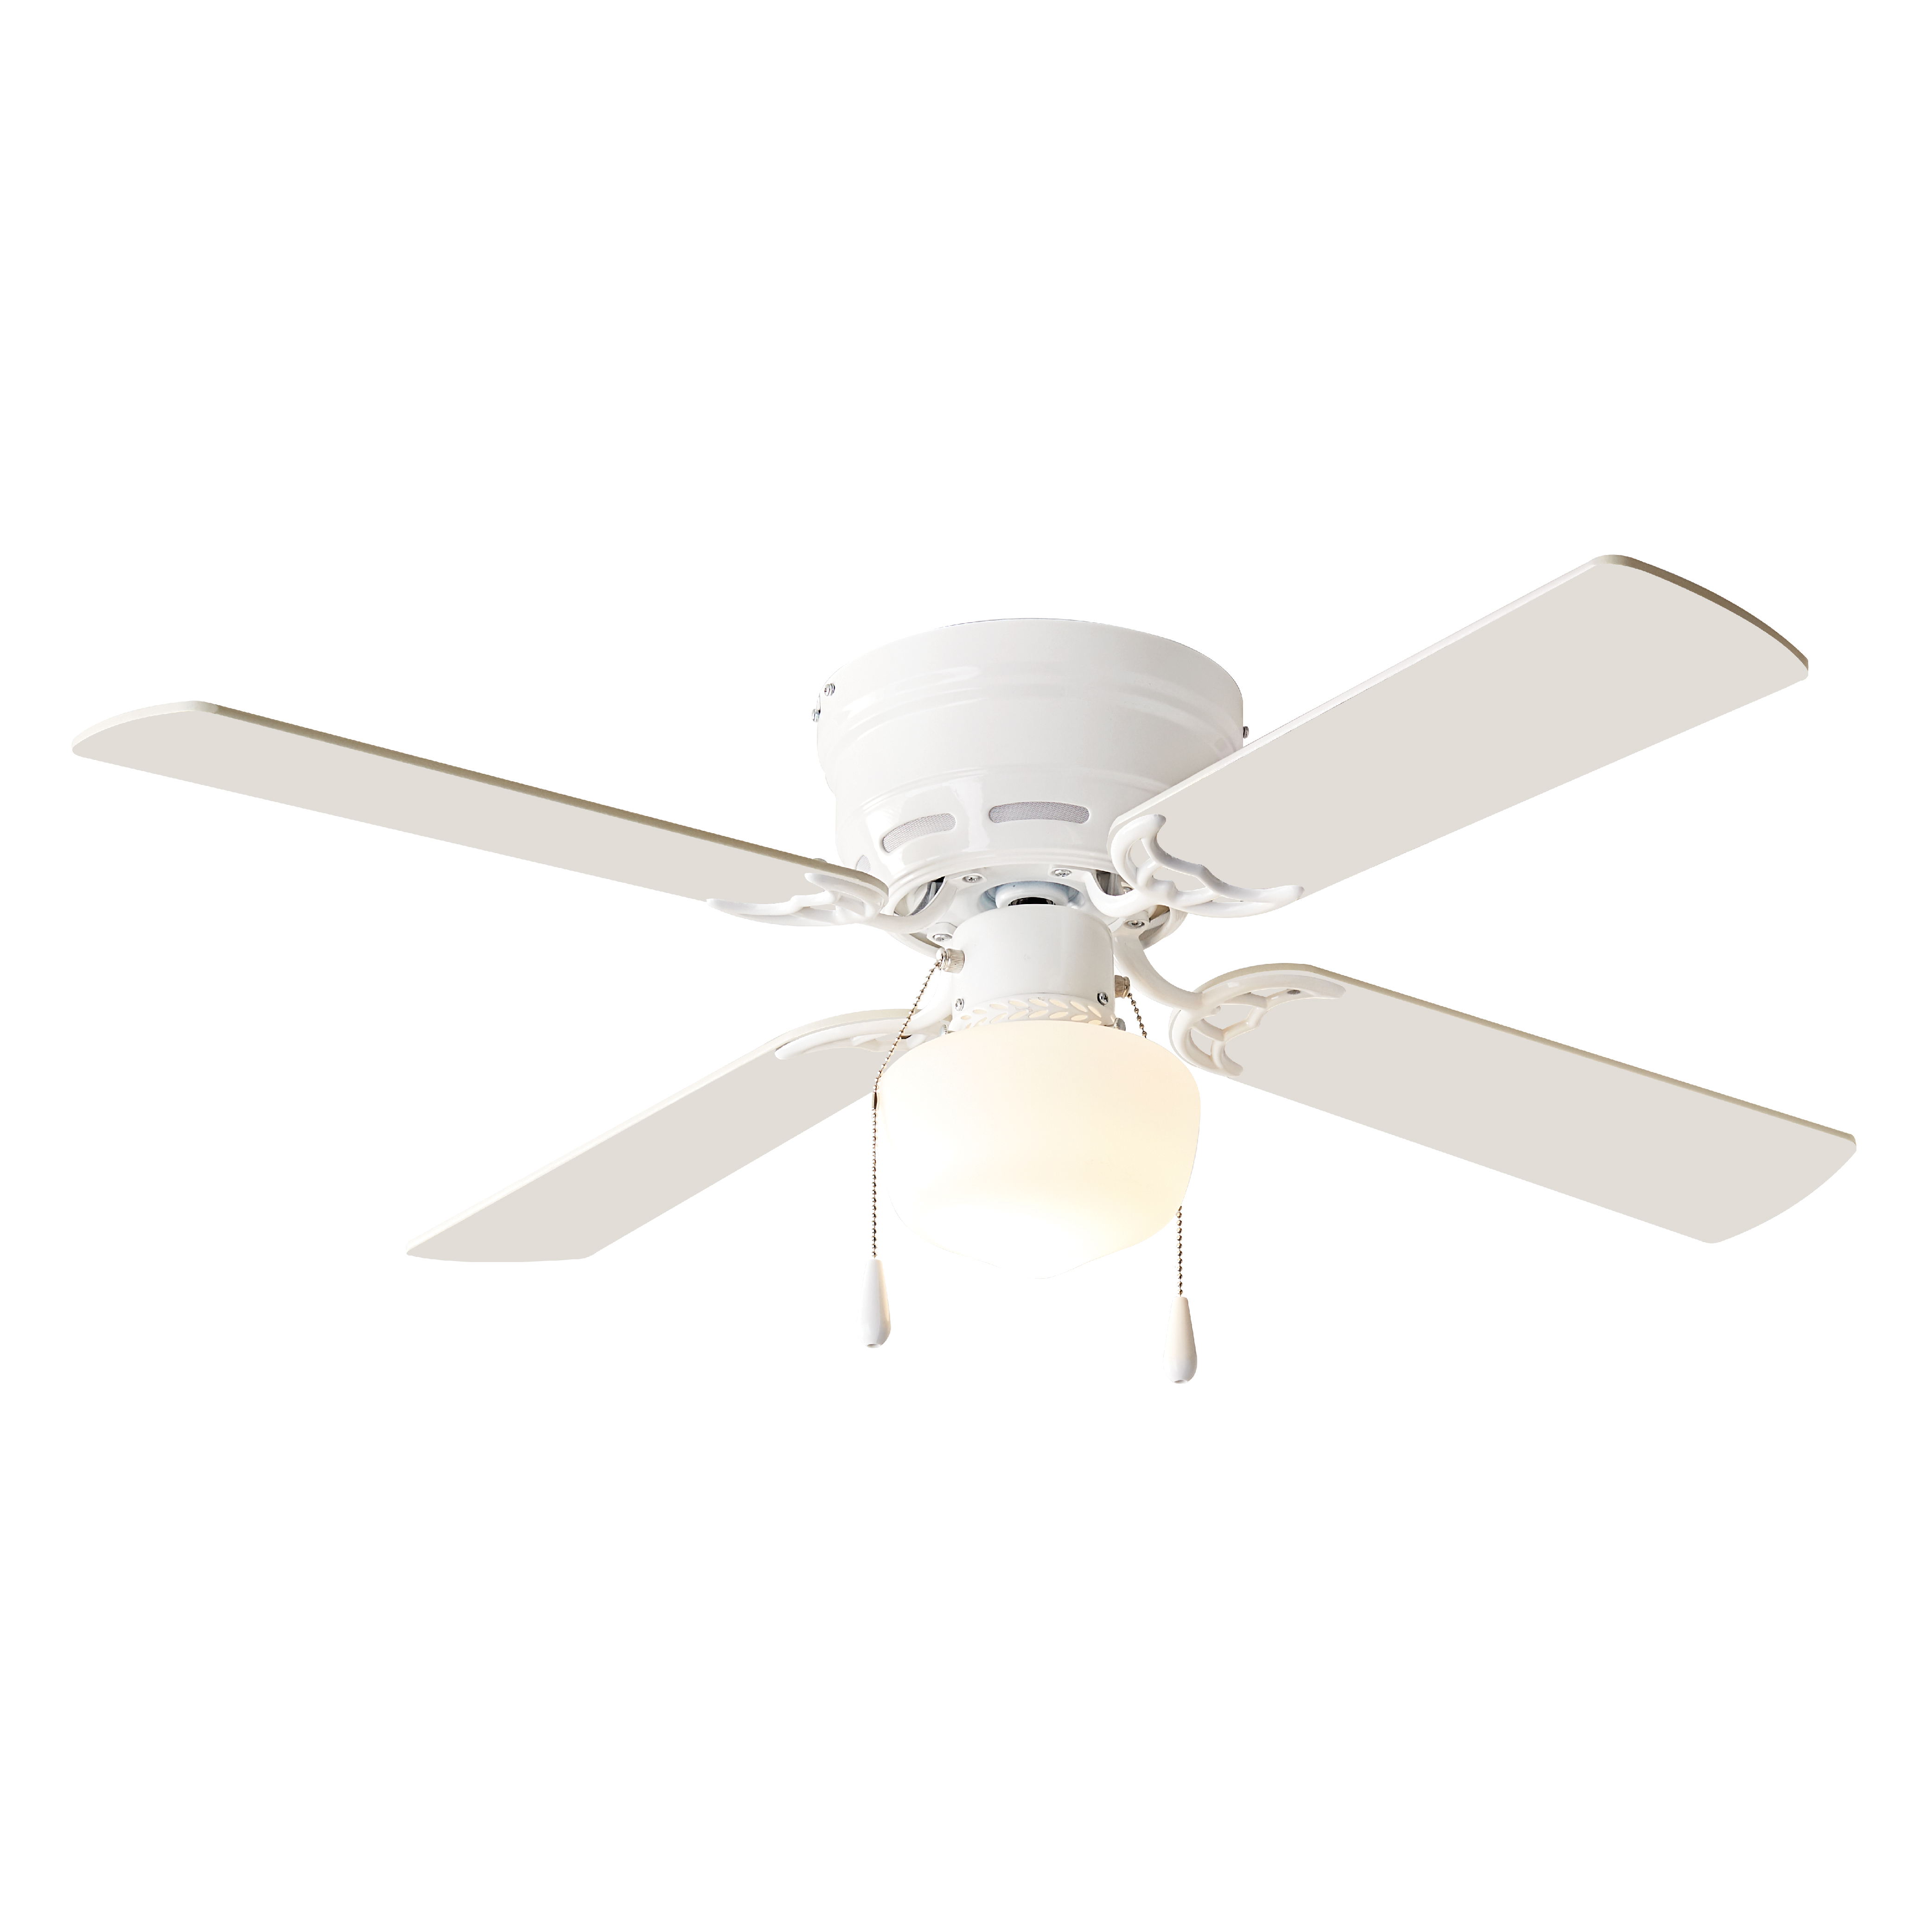 Mainstays 42 Inch Hugger Metal Indoor Ceiling Fan with Light, White, 4 Blades, LED Bulb, Reverse Airflow - image 1 of 17